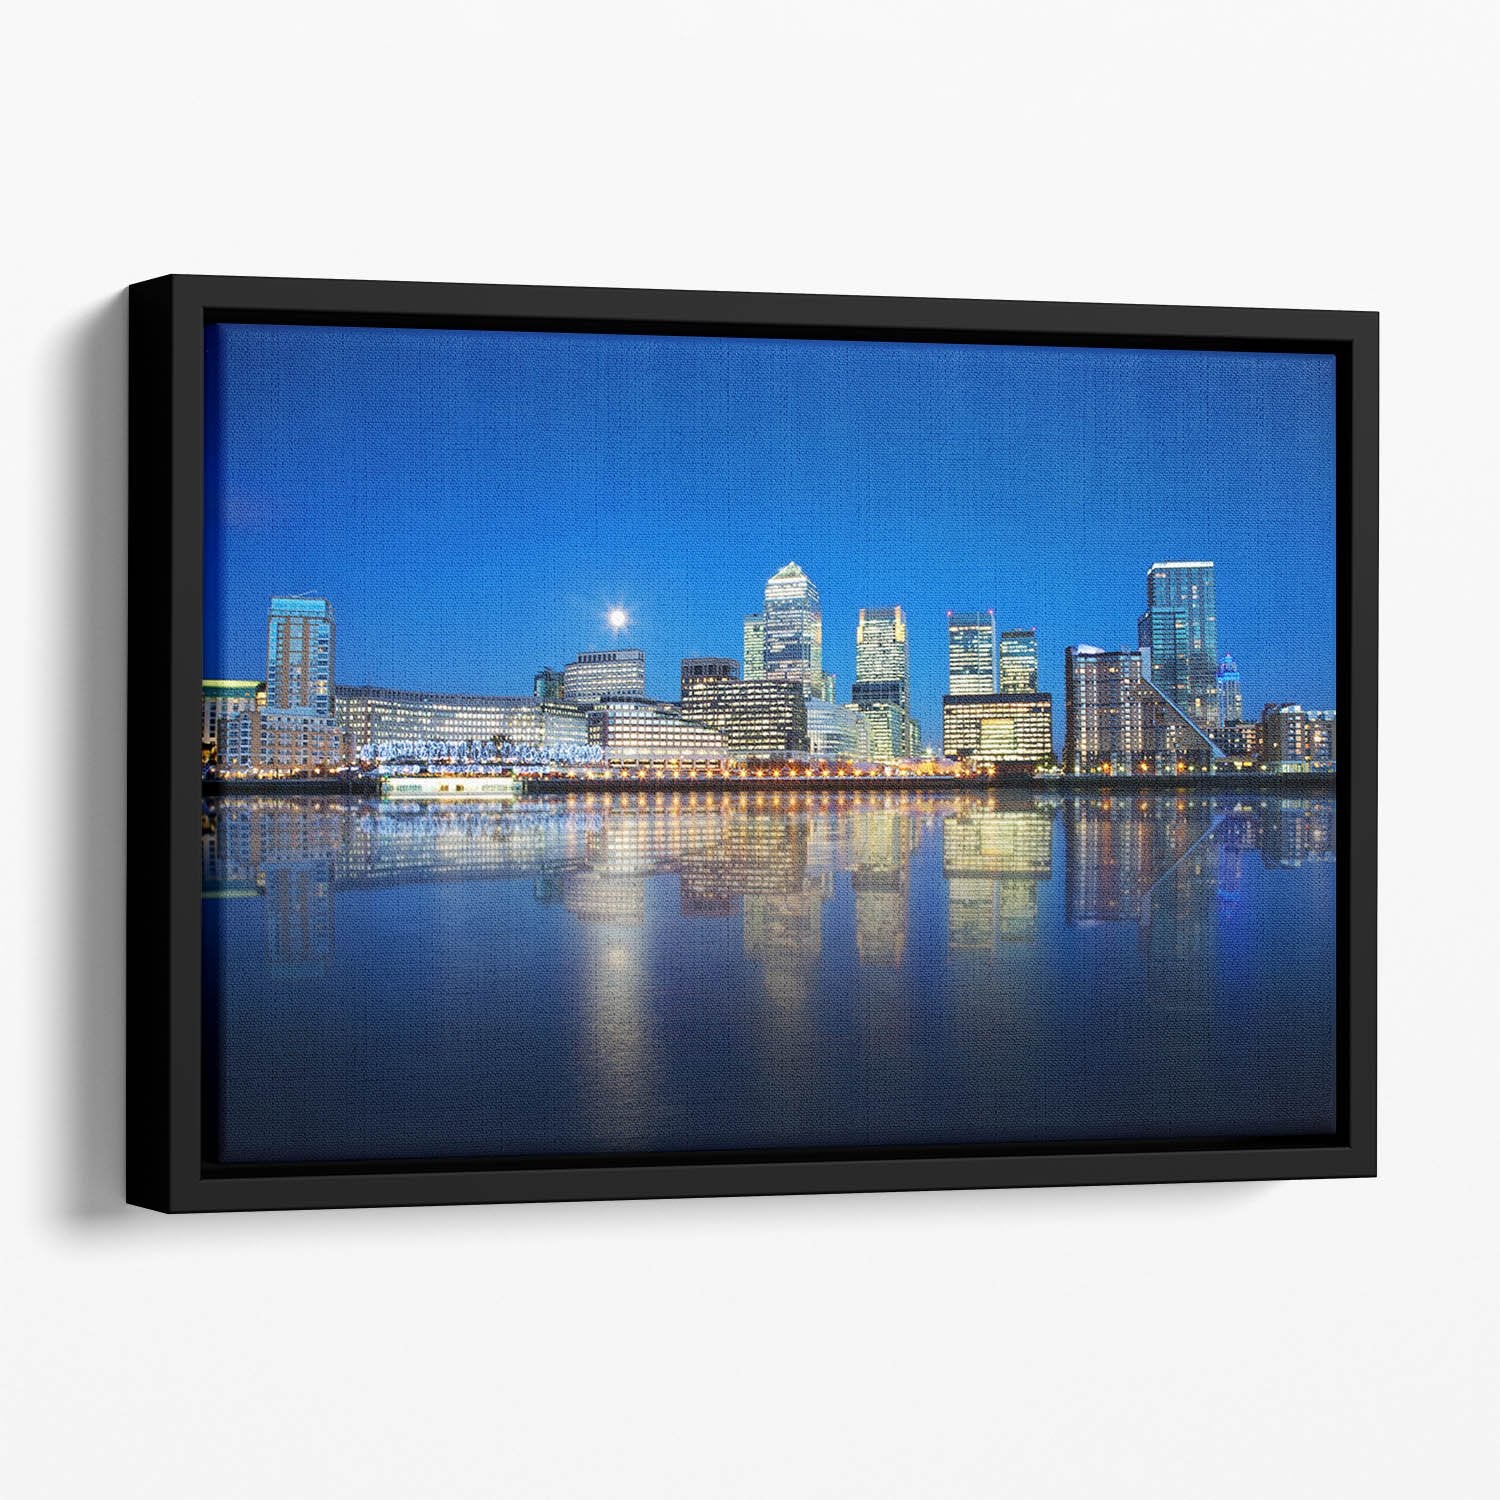 London skyscrapers reflected Floating Framed Canvas